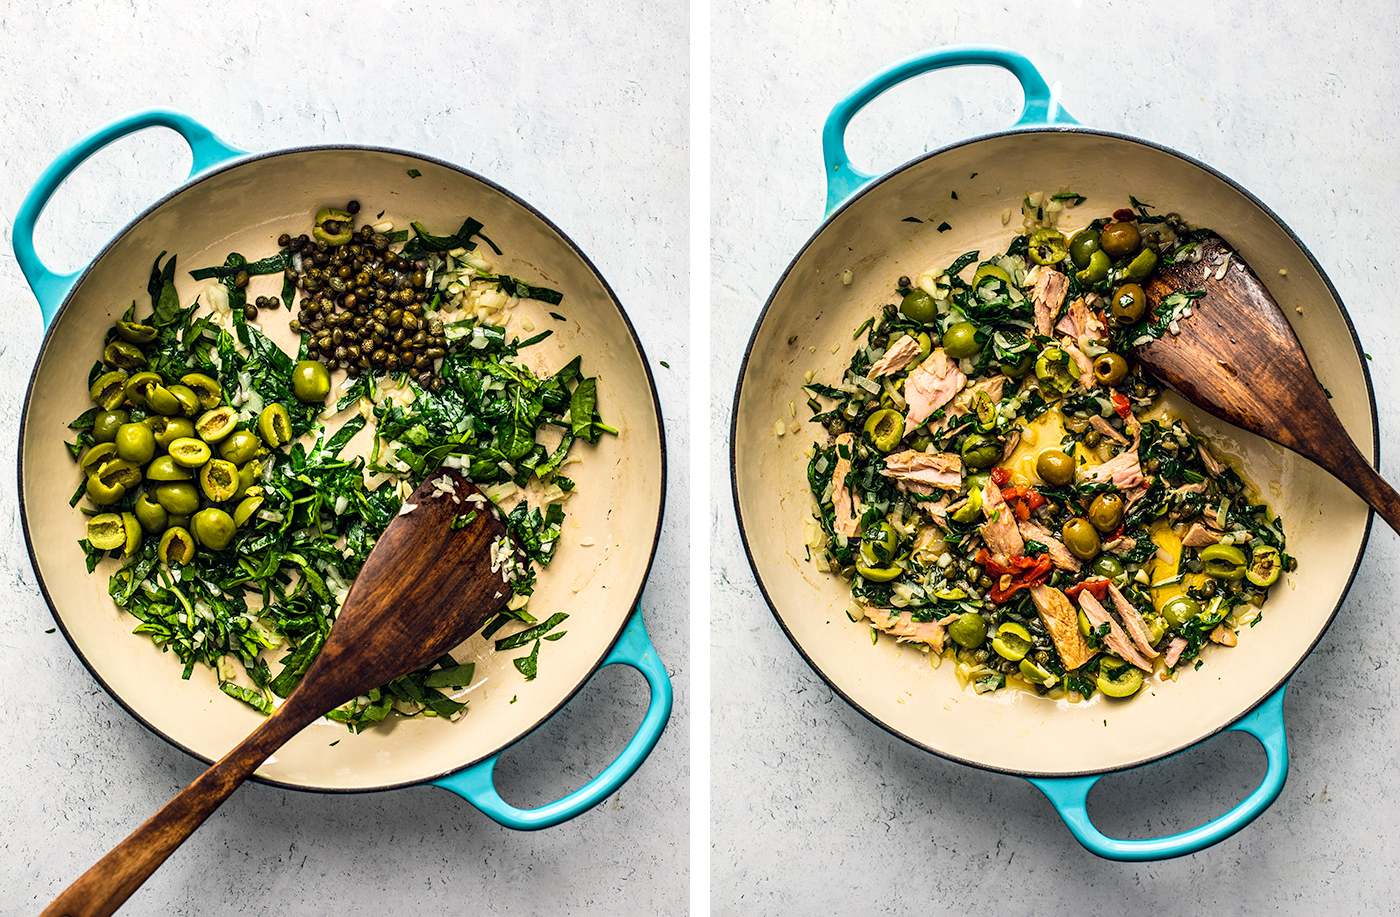 L: Skillet with spinach, olives and capers; R: Tuna added to the skillet